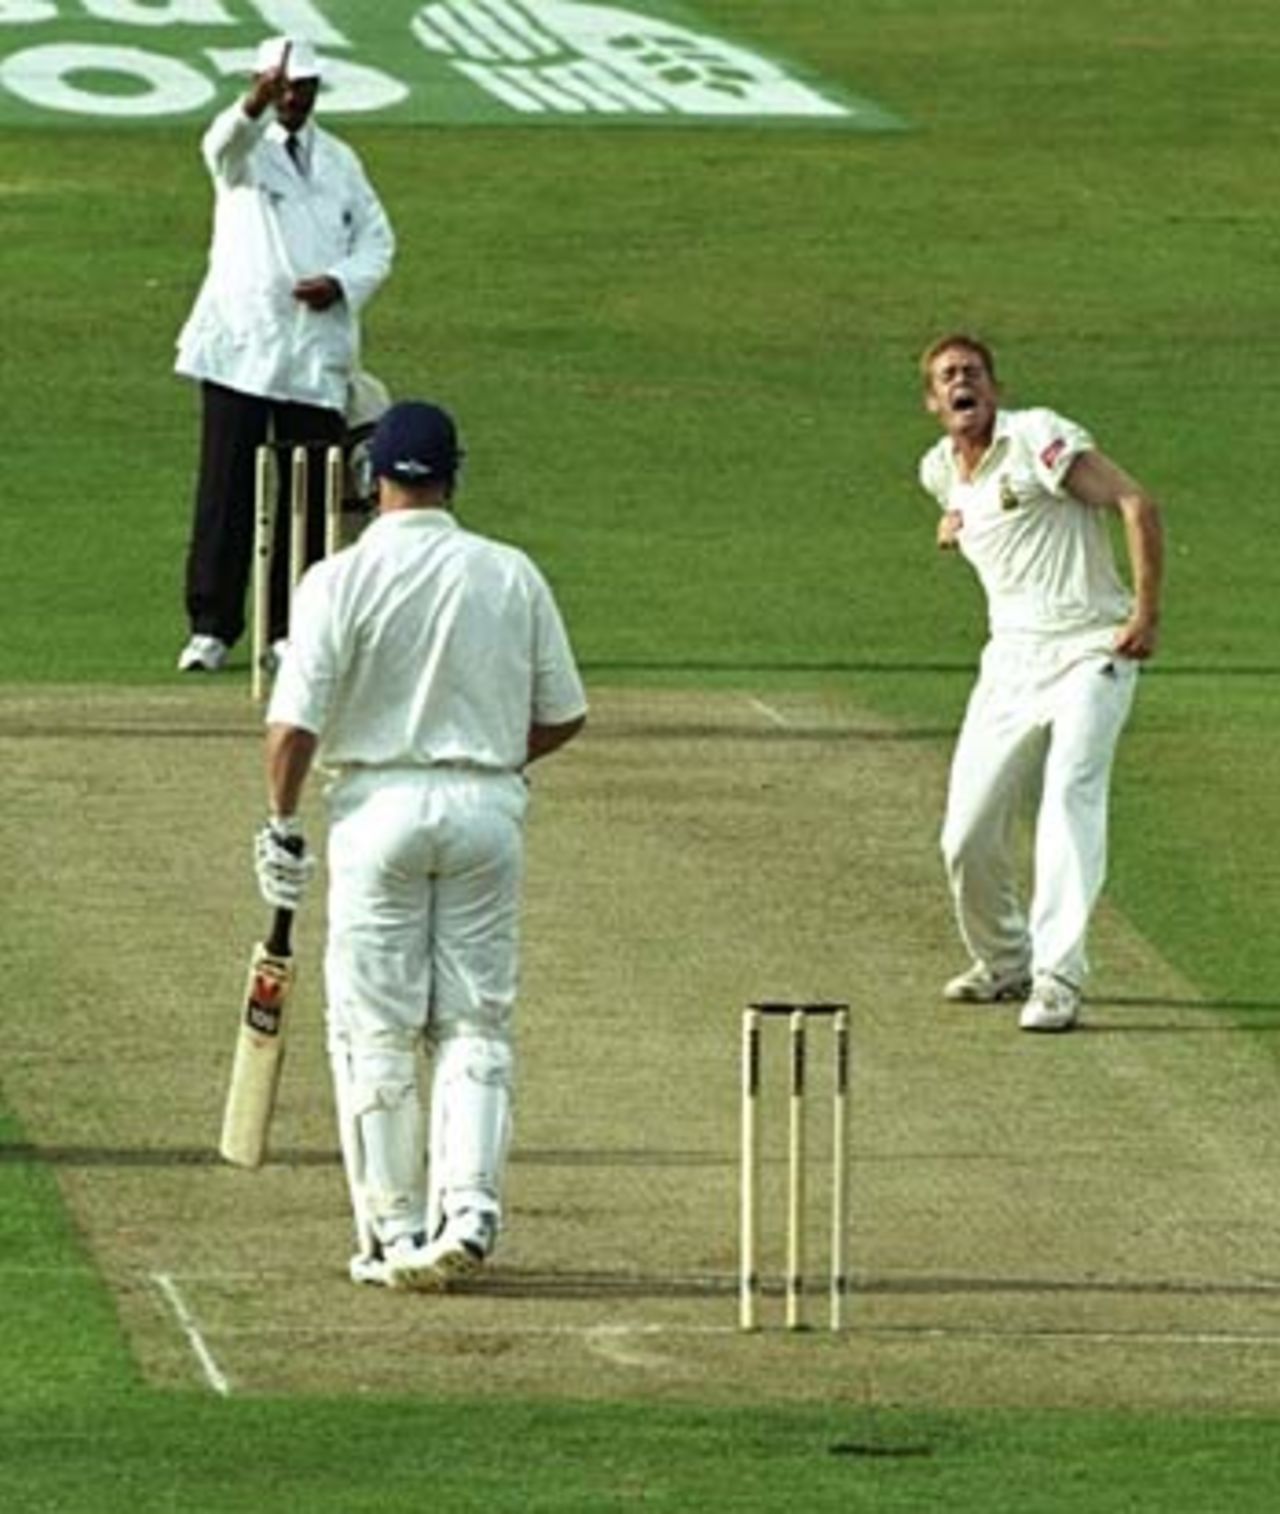 Andrew Flintoff is controversially dismissed by Shaun Pollock, England v South Africa, Headingley, 5th Test, August 6, 1998